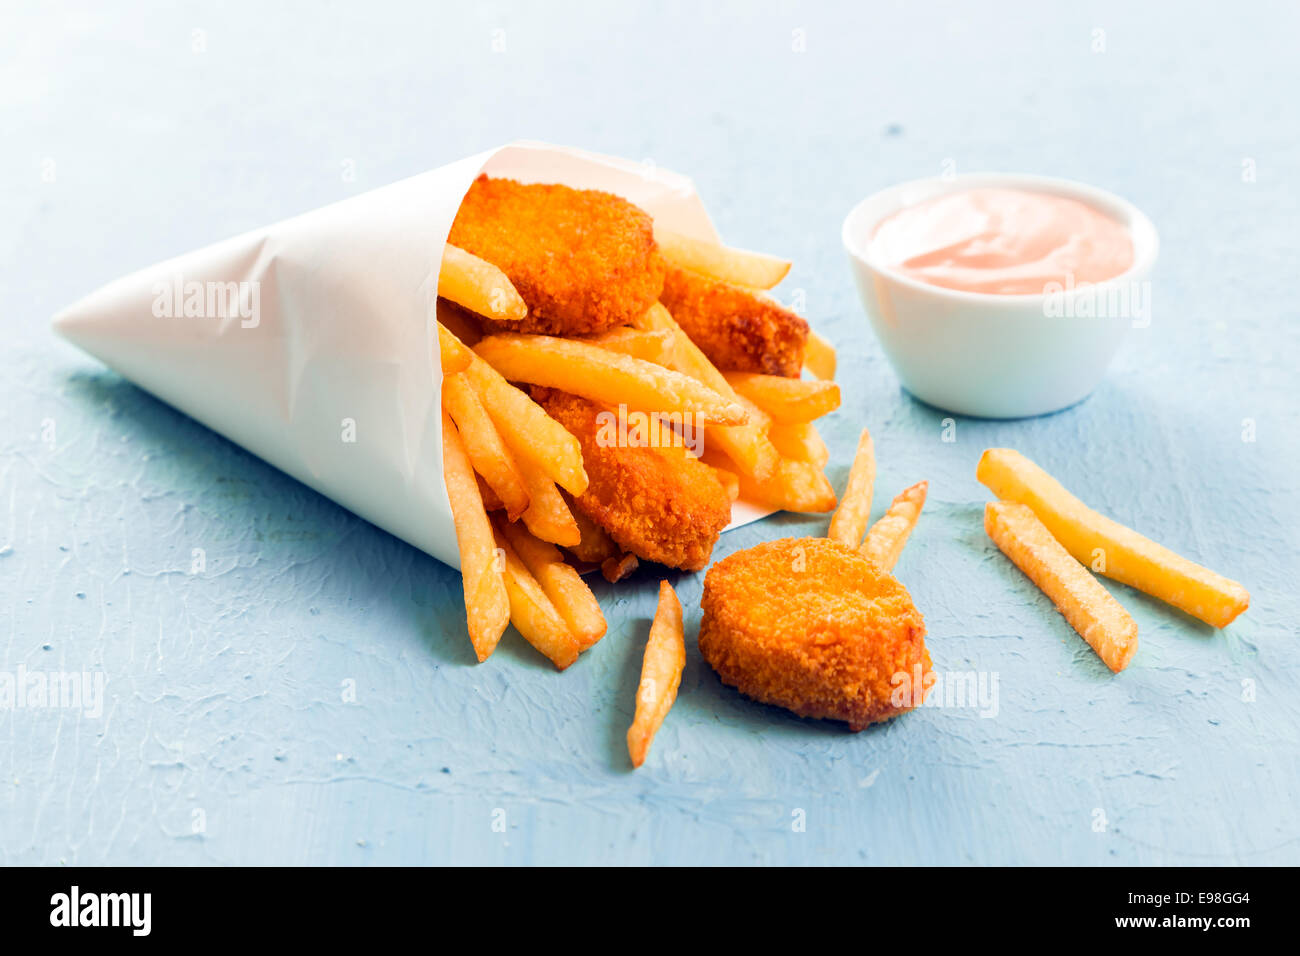 Golden fish nuggets with fried potato chips or French fries spilling out of a takeaway paper cone onto a blue surface with a small bowl of mayo dip Stock Photo